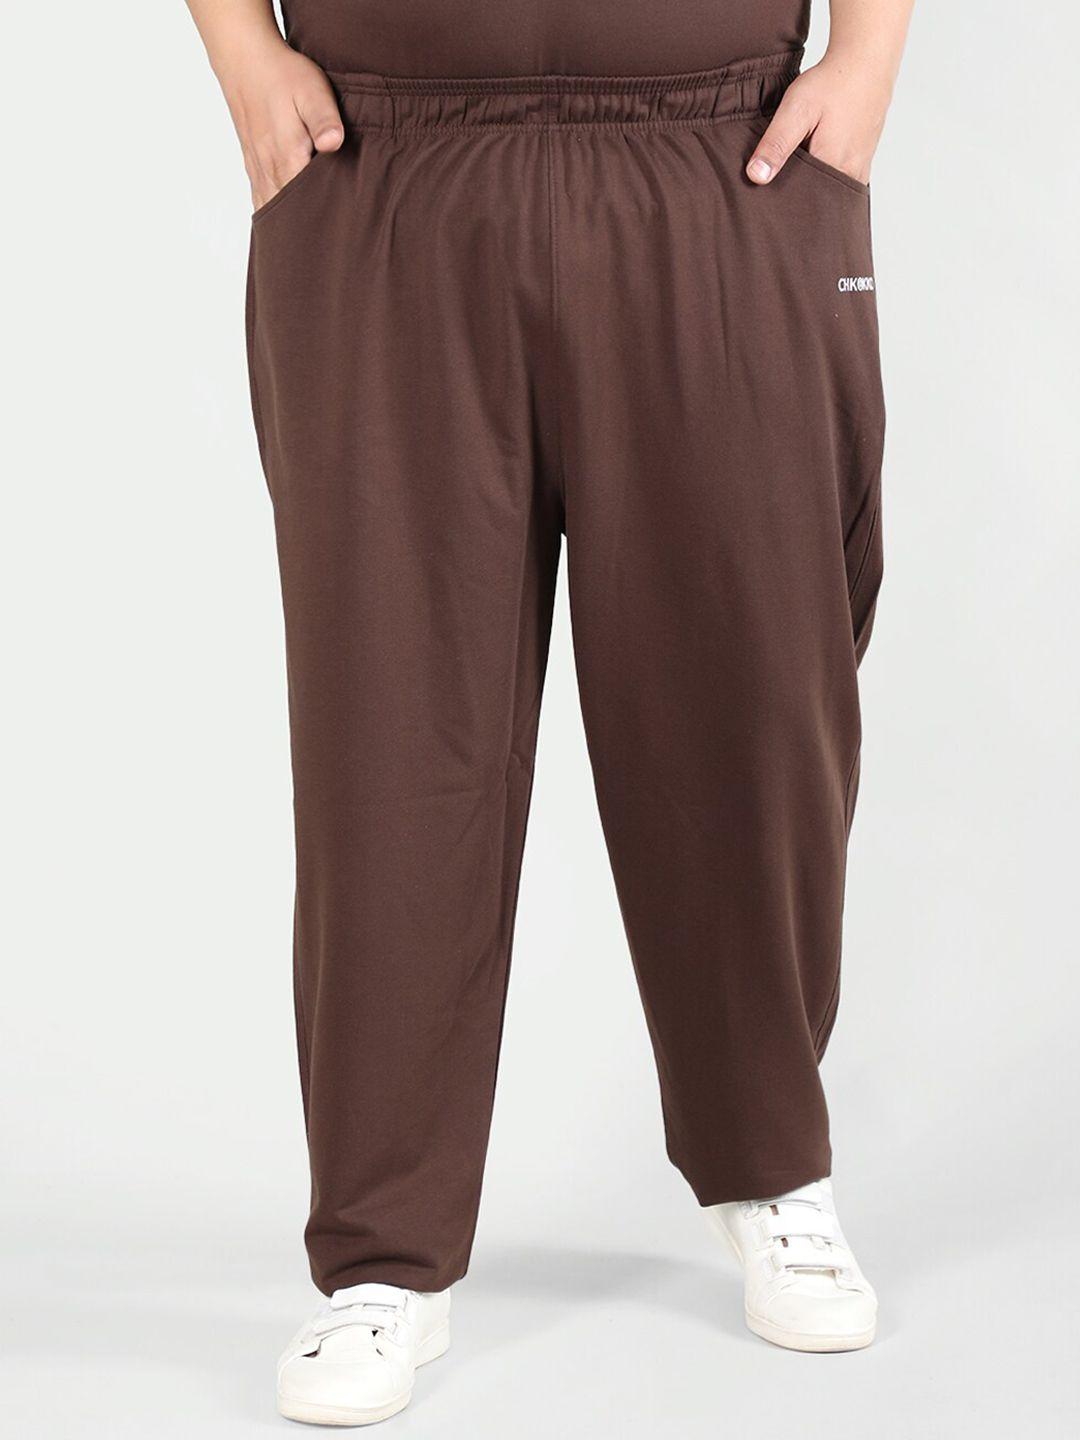 chkokko men plus size mid-rise relaxed-fit track pants